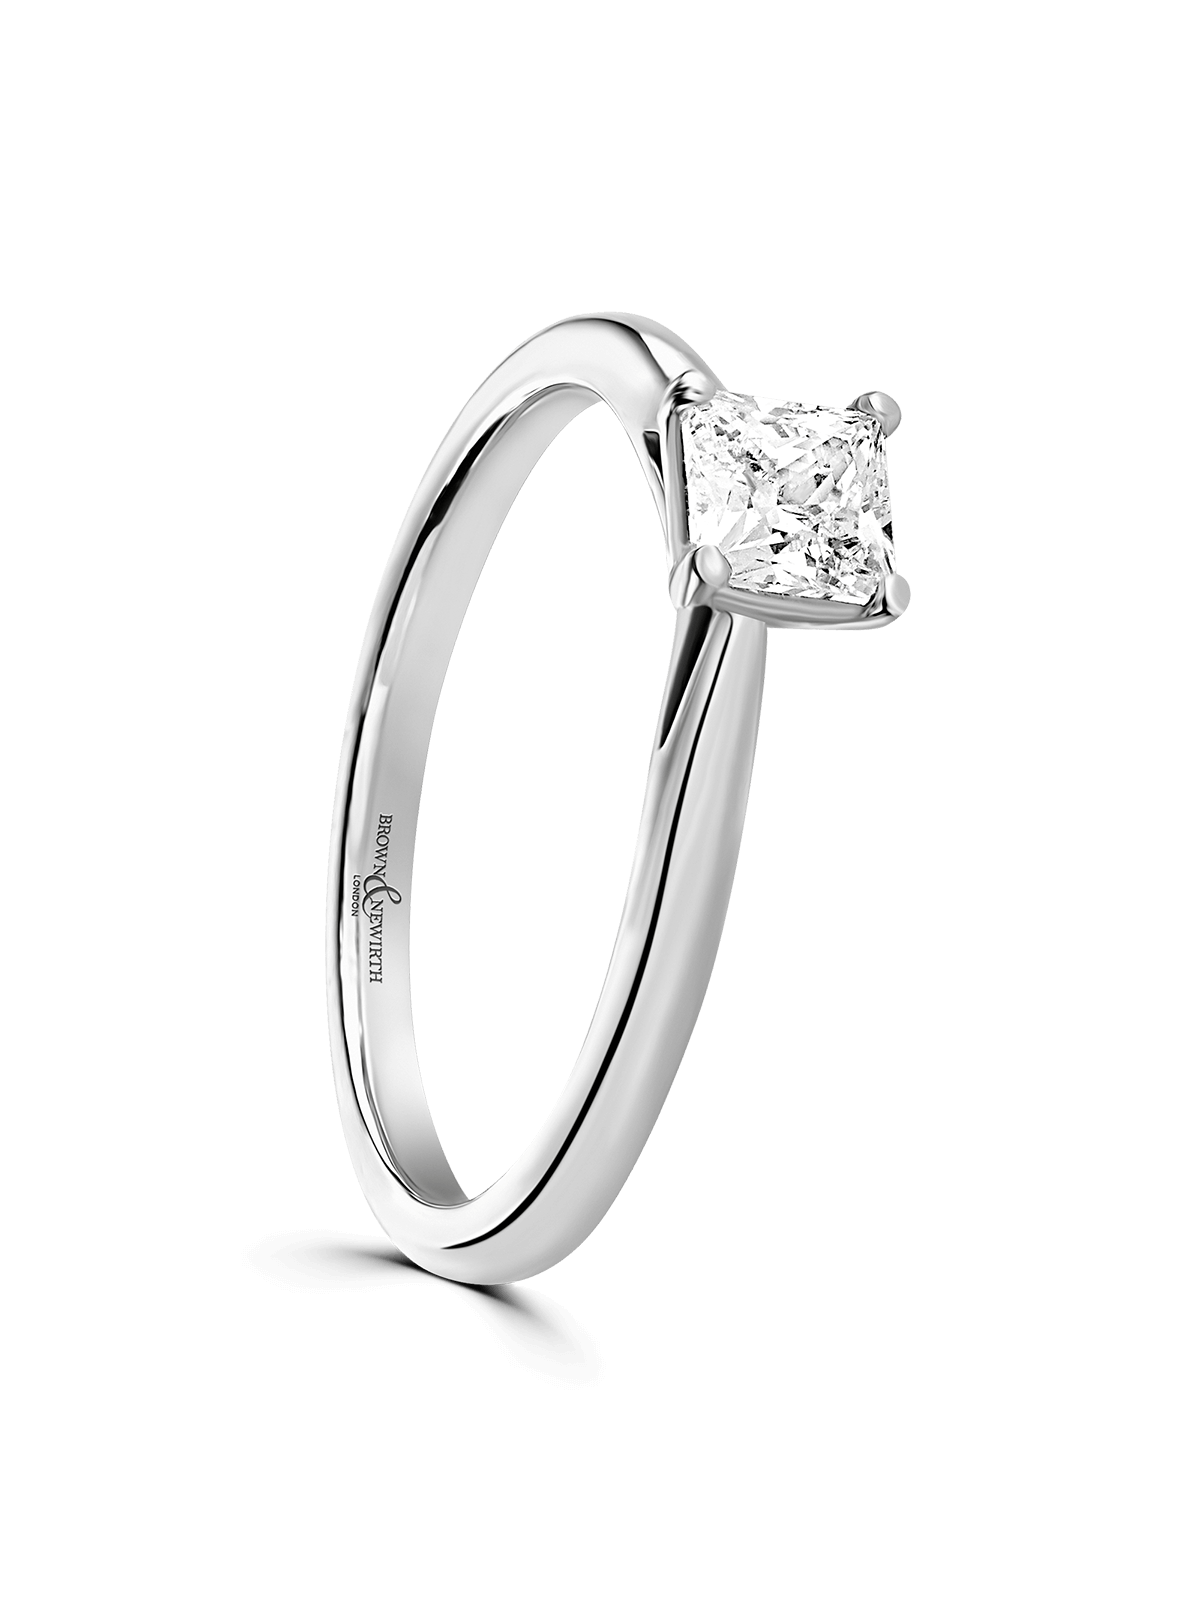 Brown & Newirth Heartbeat 0.50ct Princess Cut Certificated Diamond Solitaire Engagement Ring in Platinum